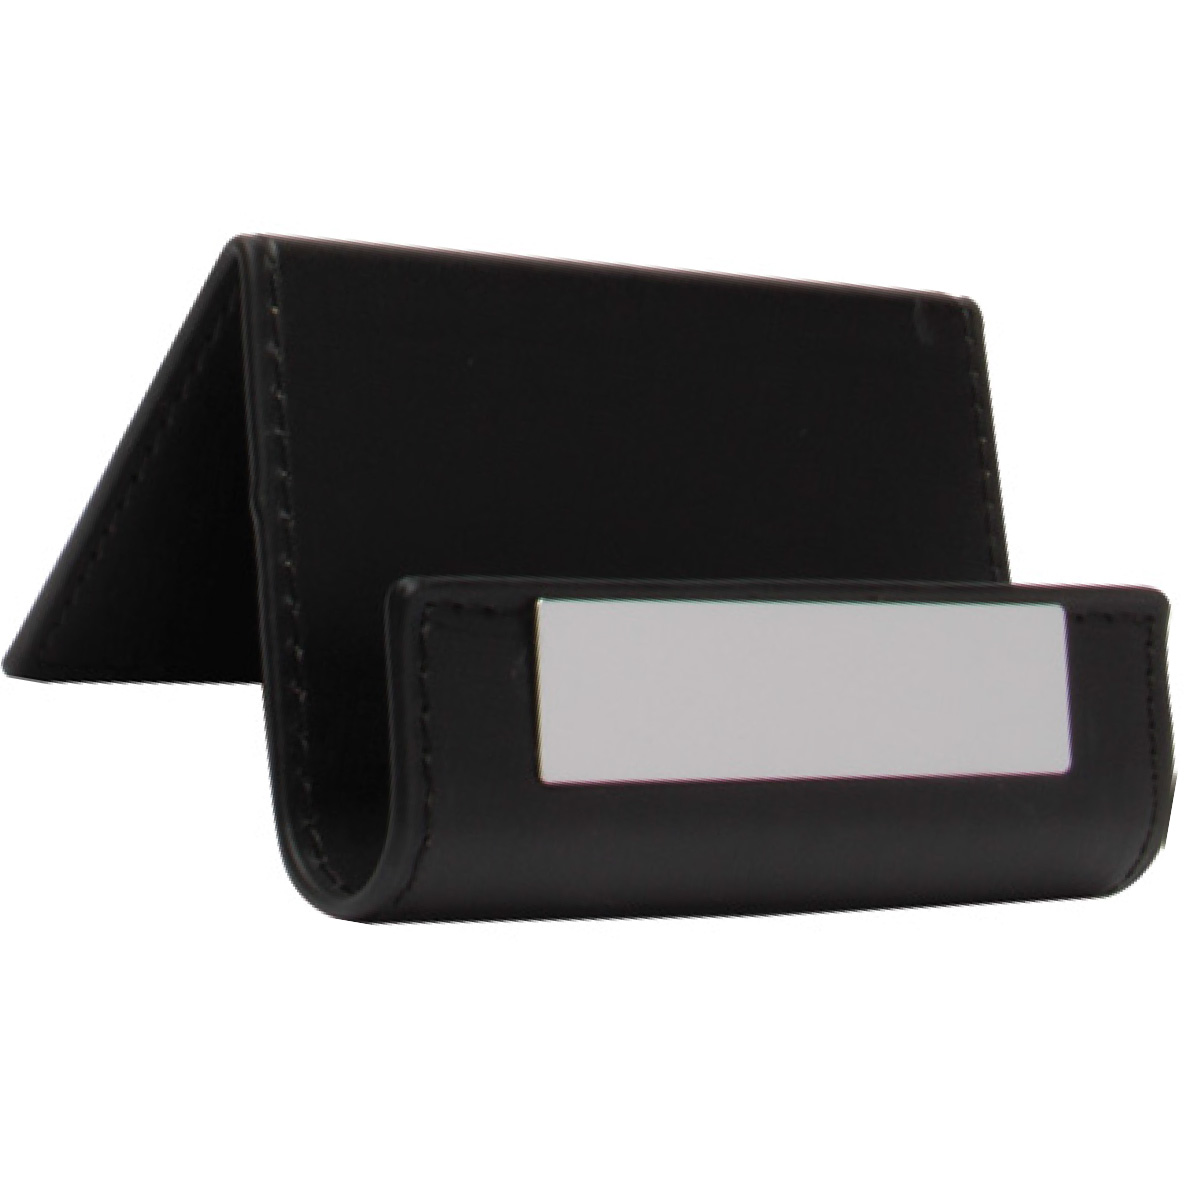 Black Deluxe Cell Phone and Tablet Stand